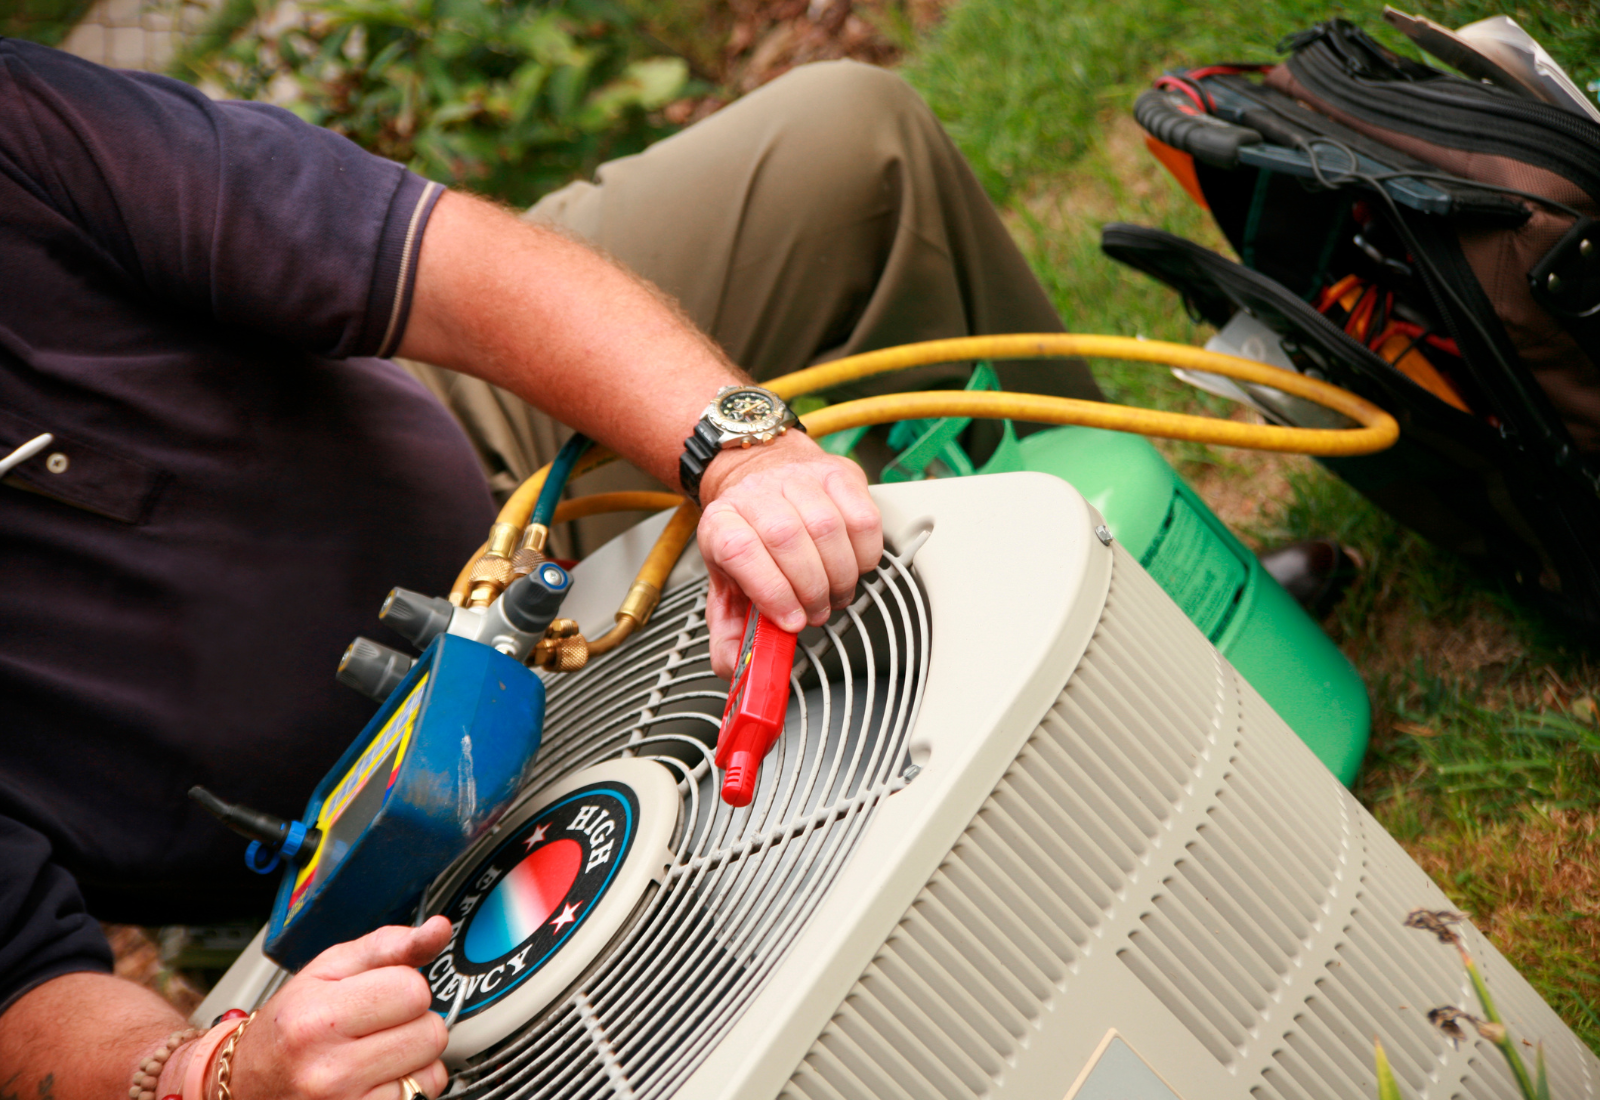 AC technician servicing an air conditioning system